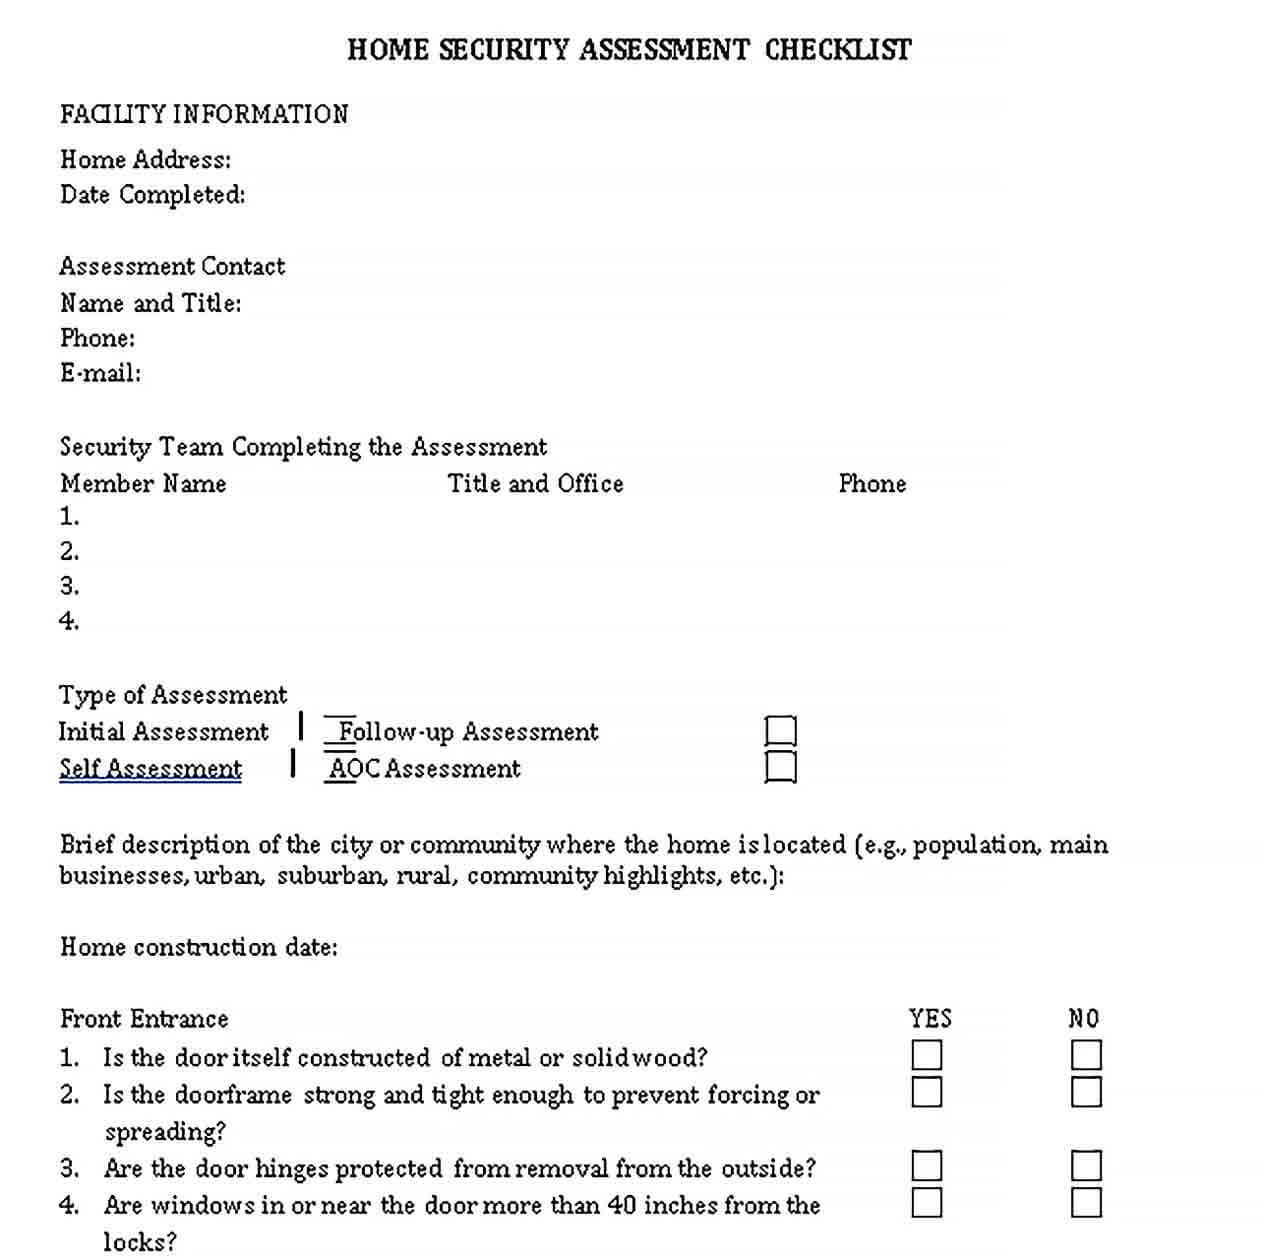 Sample Home Security Assessment Checklist